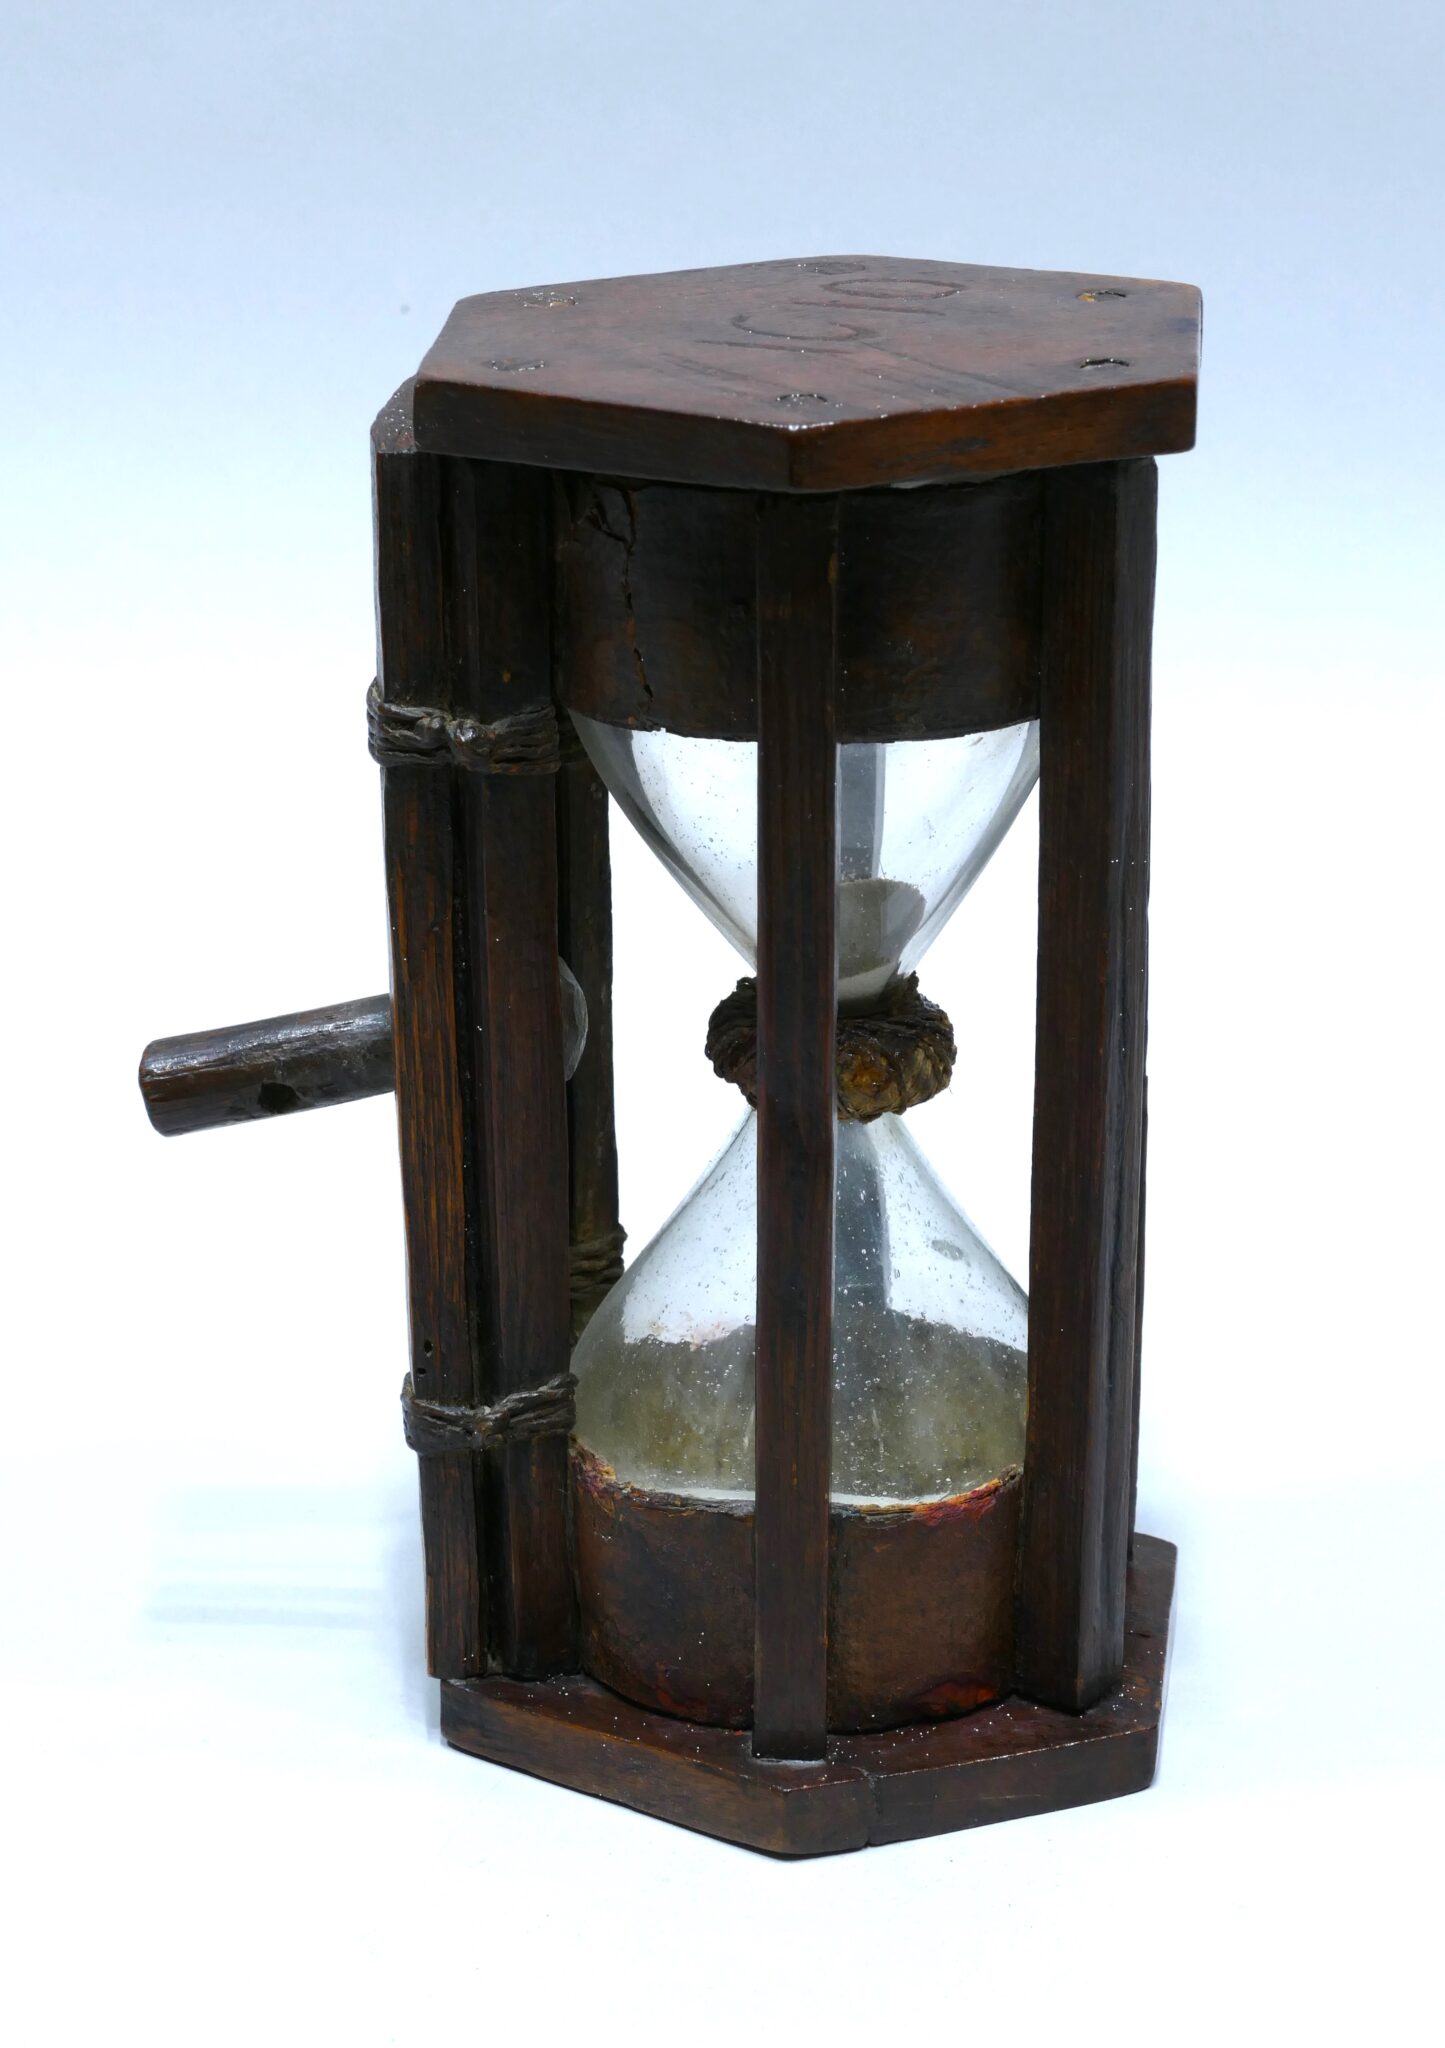 Early 18th century marine hourglass with rare fixation point